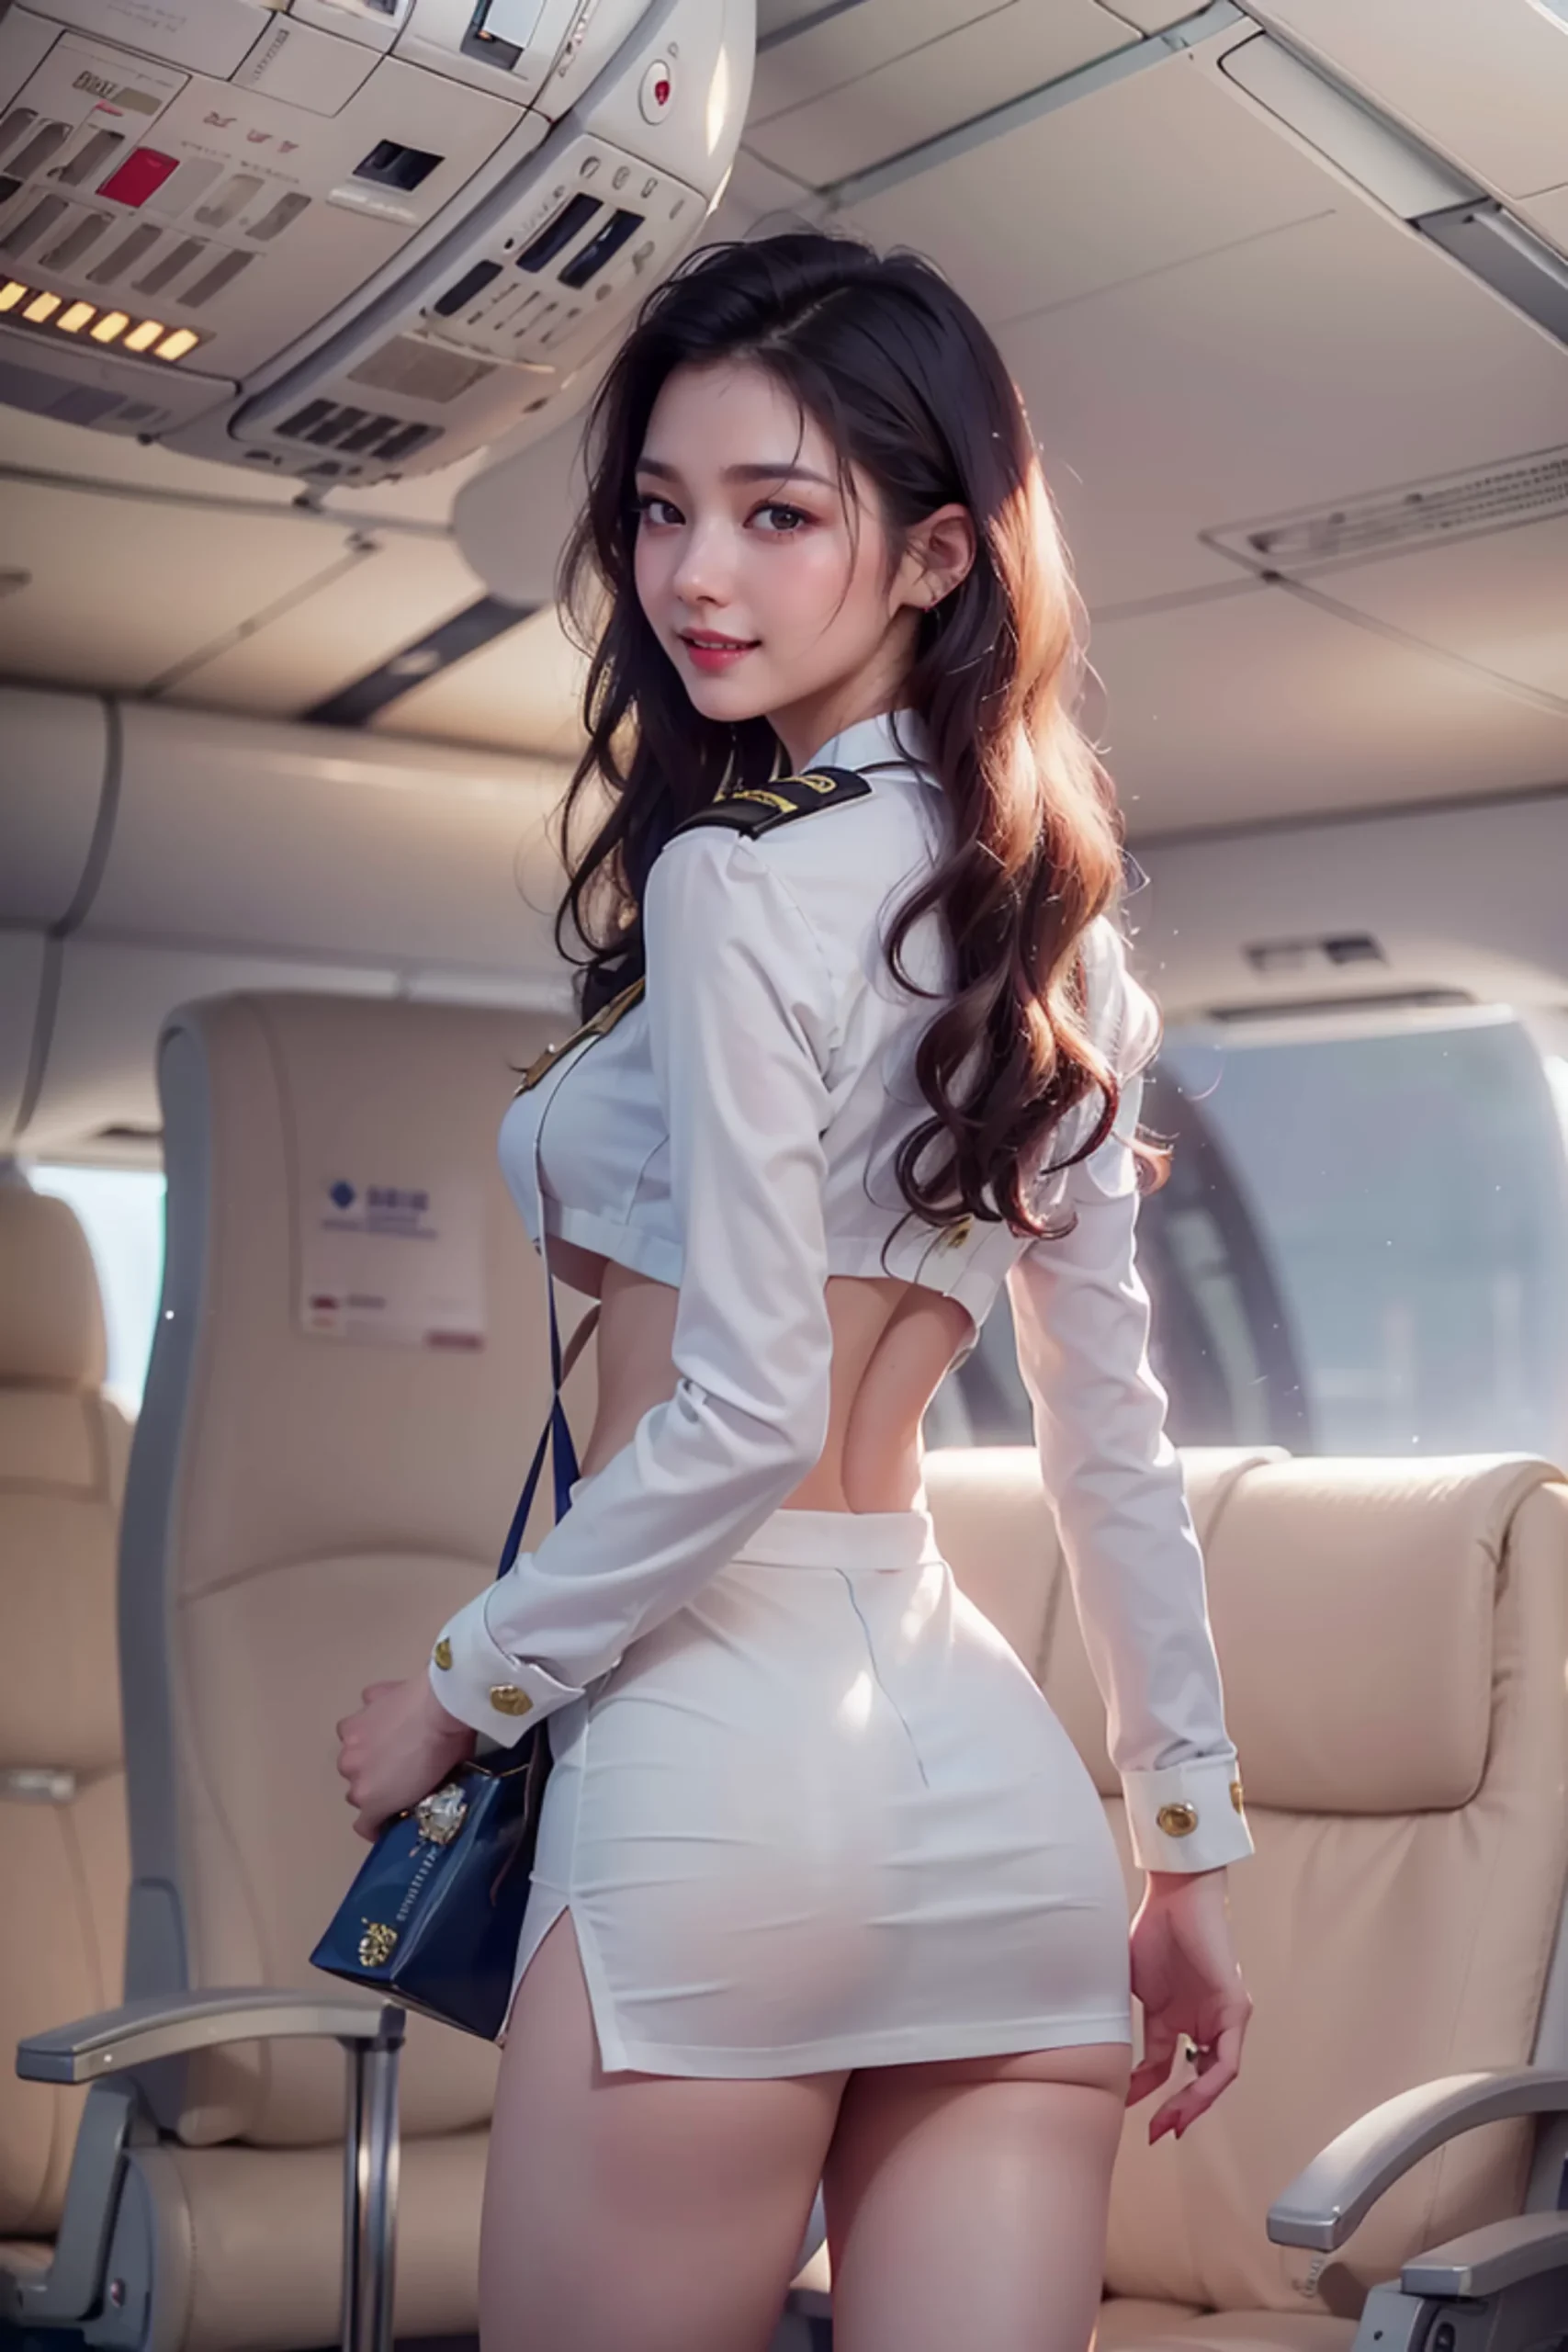 Sexy Flight Attendant Cosplay Vol. 2 Images 25